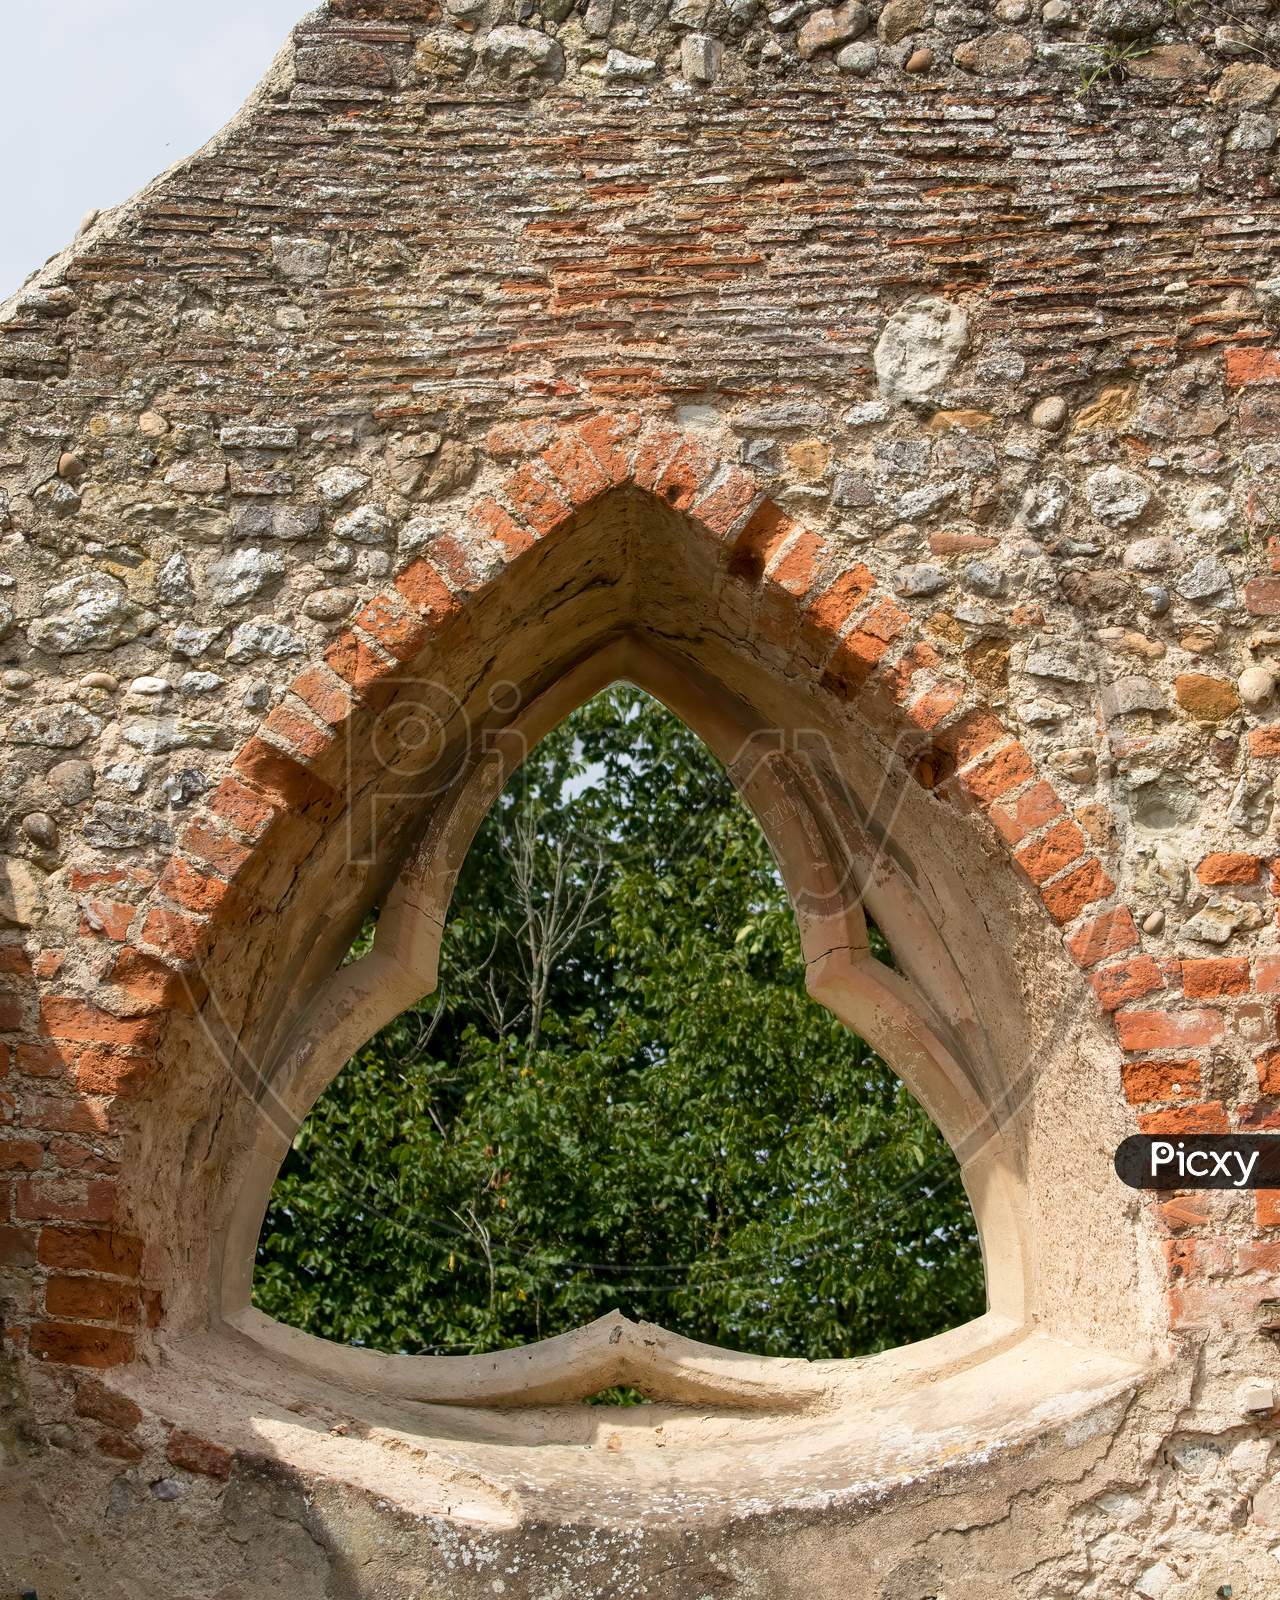 Church wall ruins with triangle window showing foliage behind